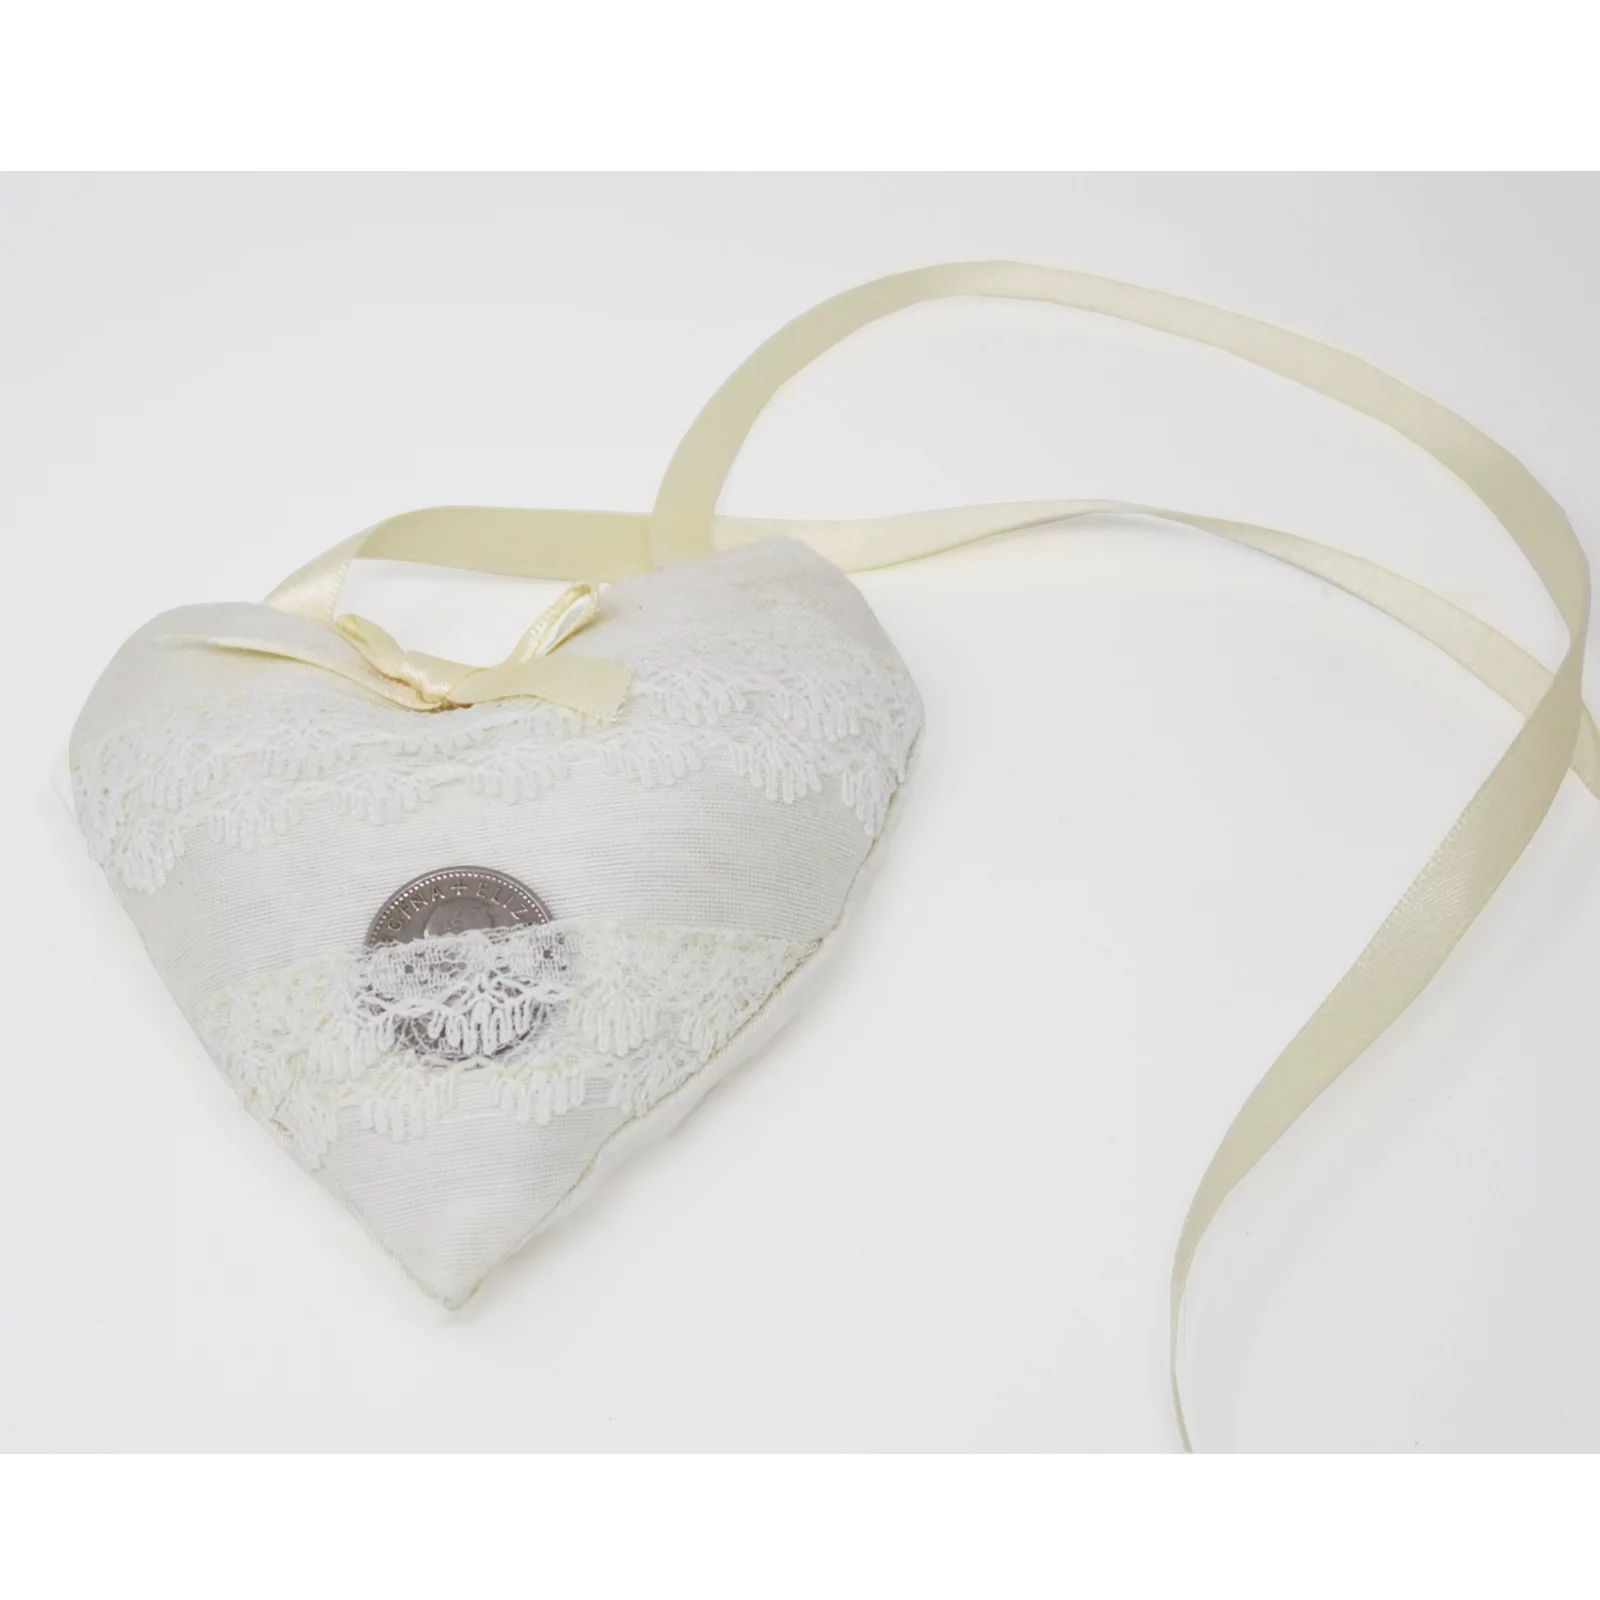 Babies Nottingham Lace Heart with Lucky Sixpence